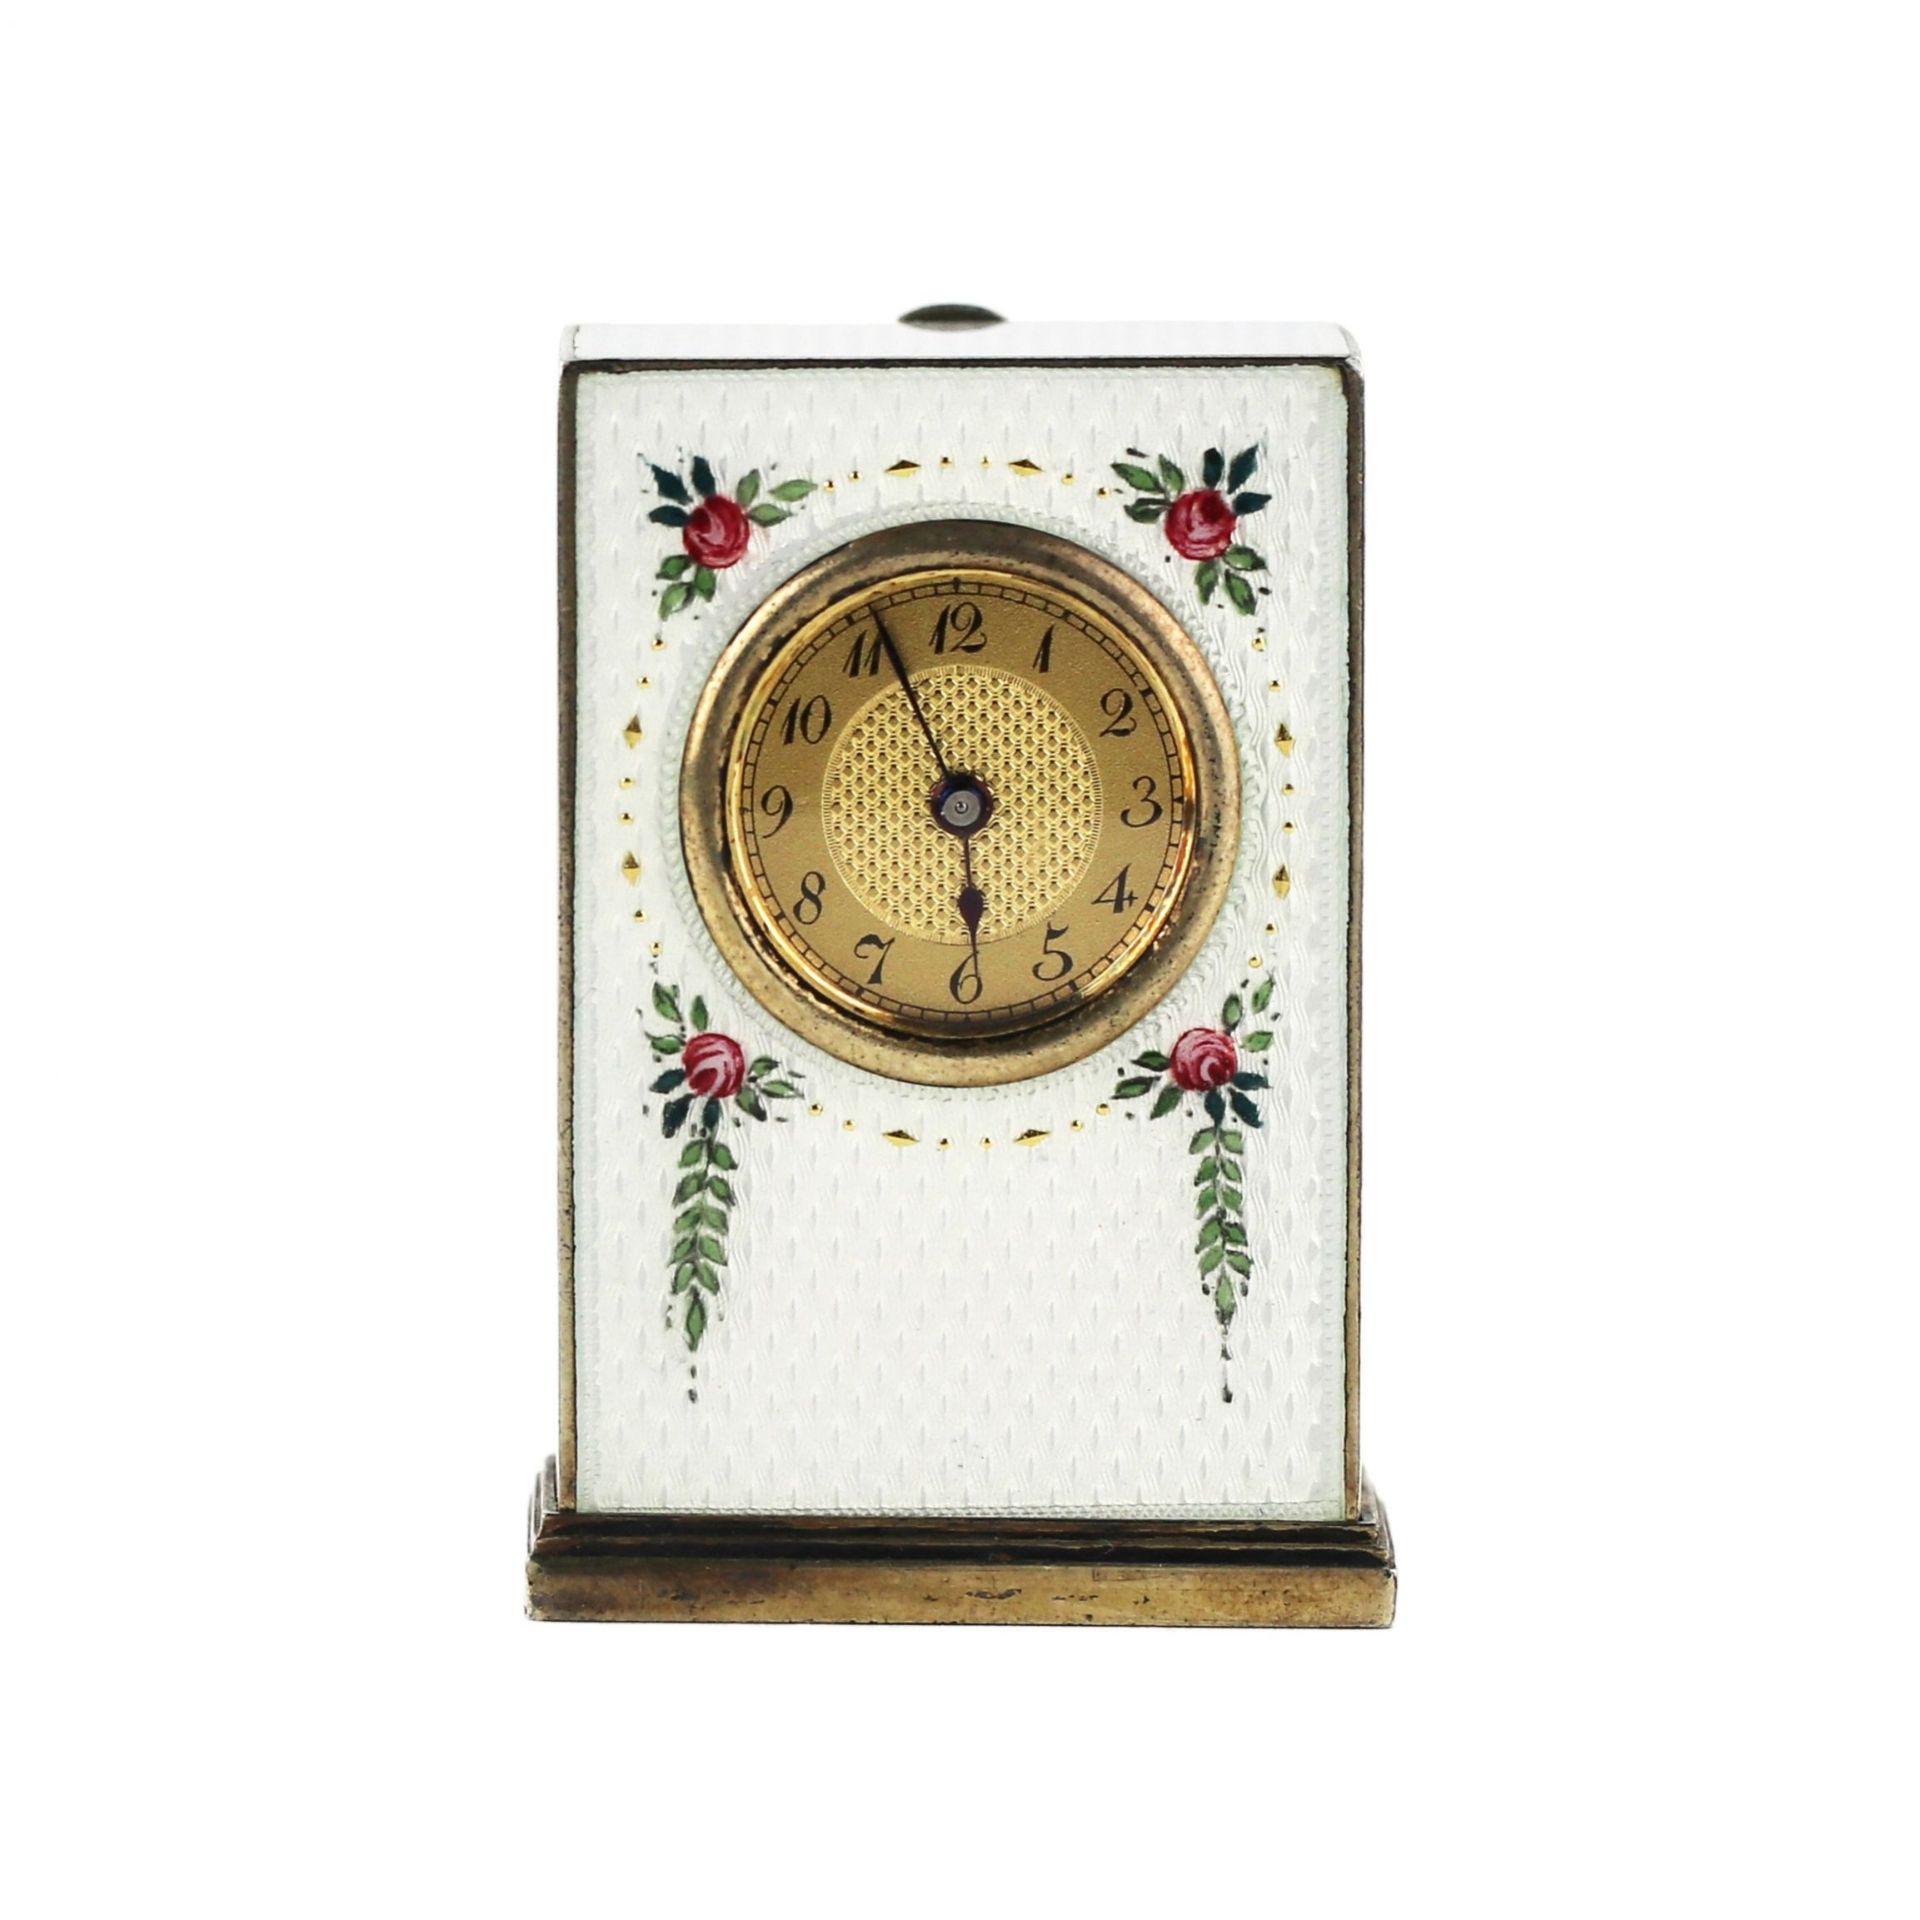 Miniature travel clock in a case, made of silver and guilloche enamel, early 20th century. - Bild 2 aus 10